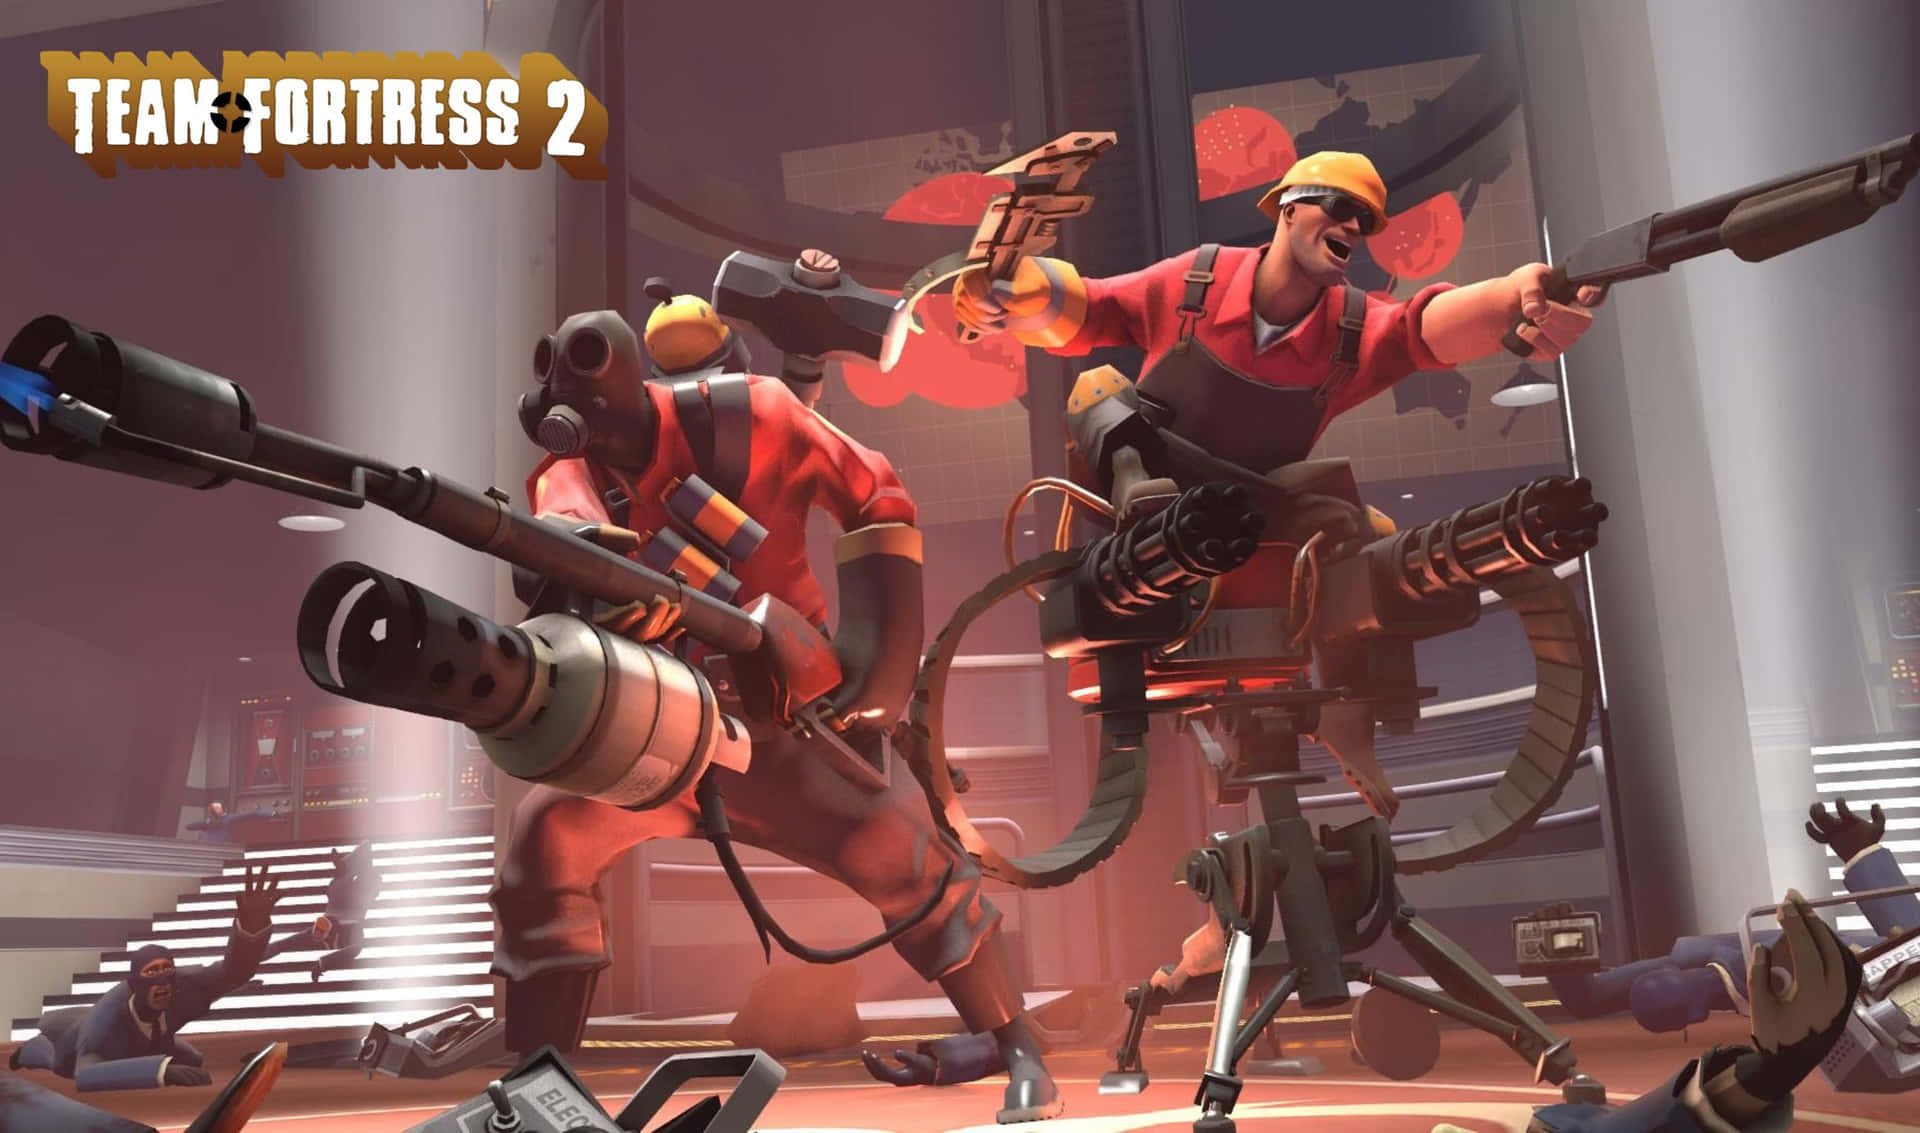 "An Epic Showdown in the World of Team Fortress 2!"